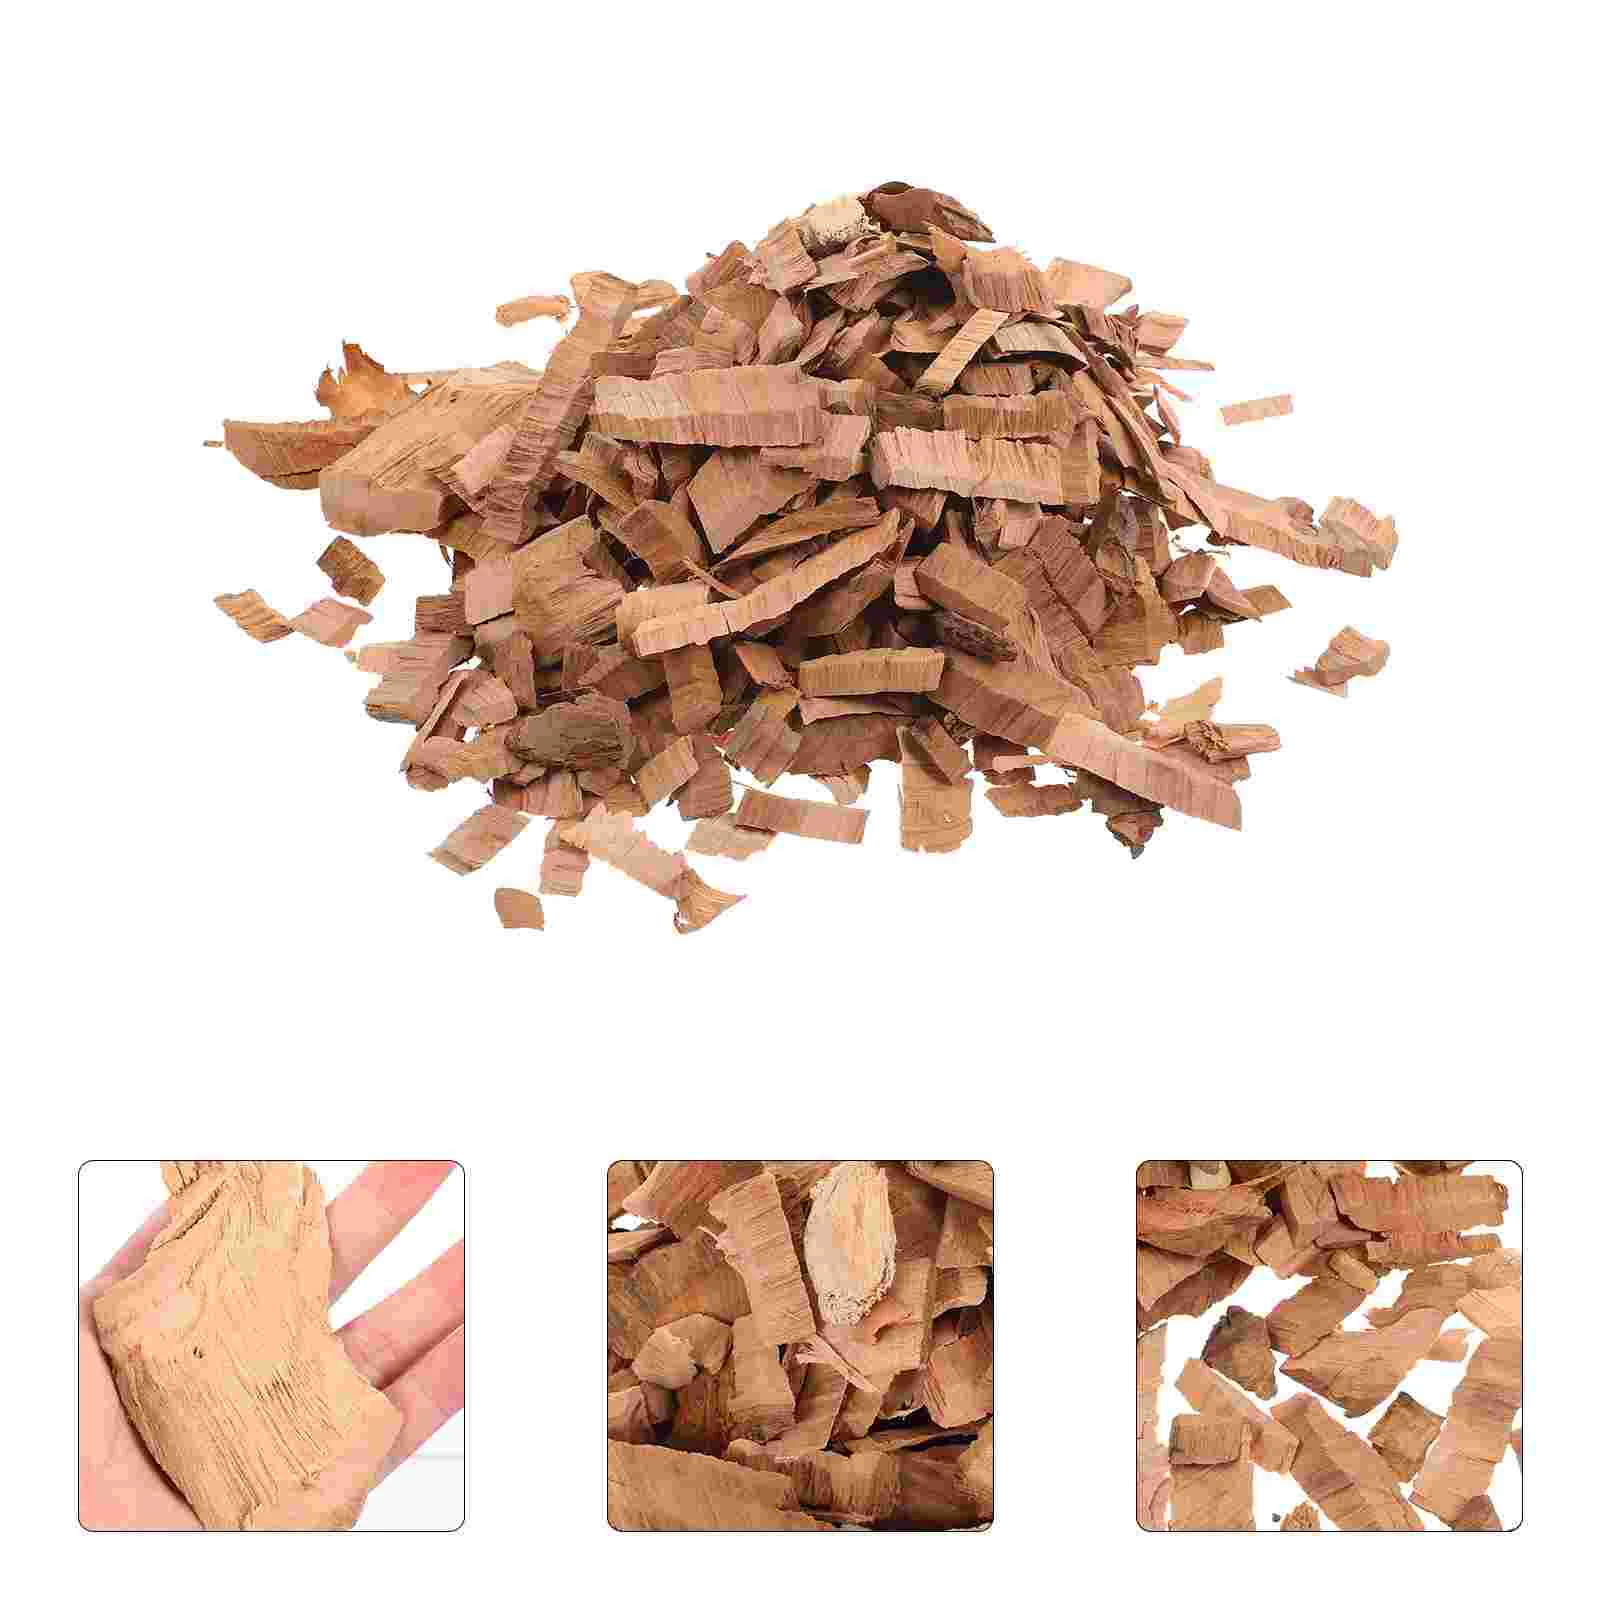 

Wood Chips Chunks Smoker Applebbq Barbecue Cookingsawdust Camping Products Pecanoak Shavings Accessories Hickory